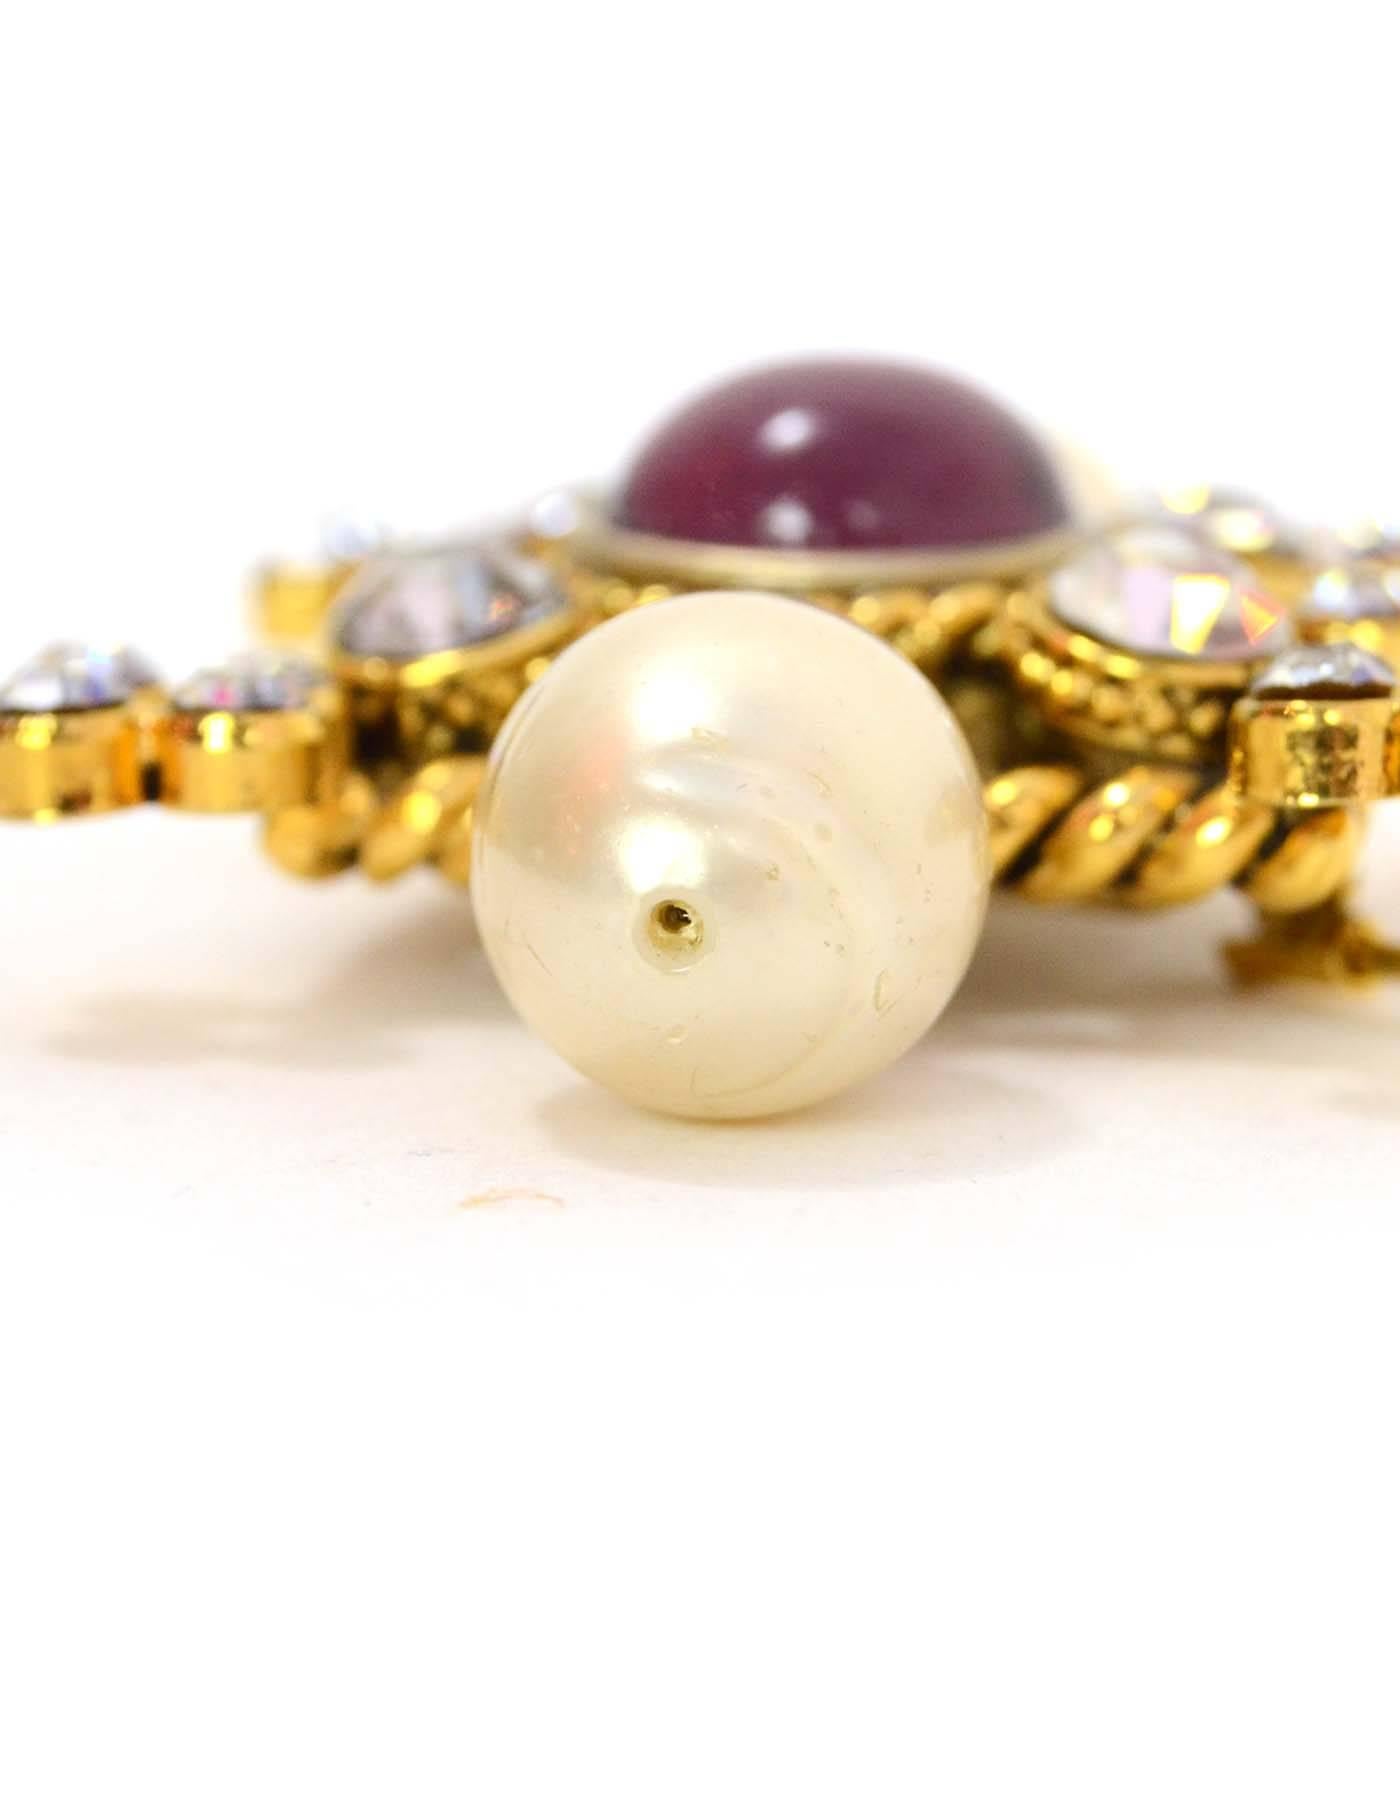 Chanel Crystal & Pearl Brooch
Features twisted gold metal framing brooch with purple stone in center
Color: Goldtone, ivory and purple
Materials: Metal, crystal, faux pearl and stone
Closure: Pin back closure
Overall Condition: Excellent